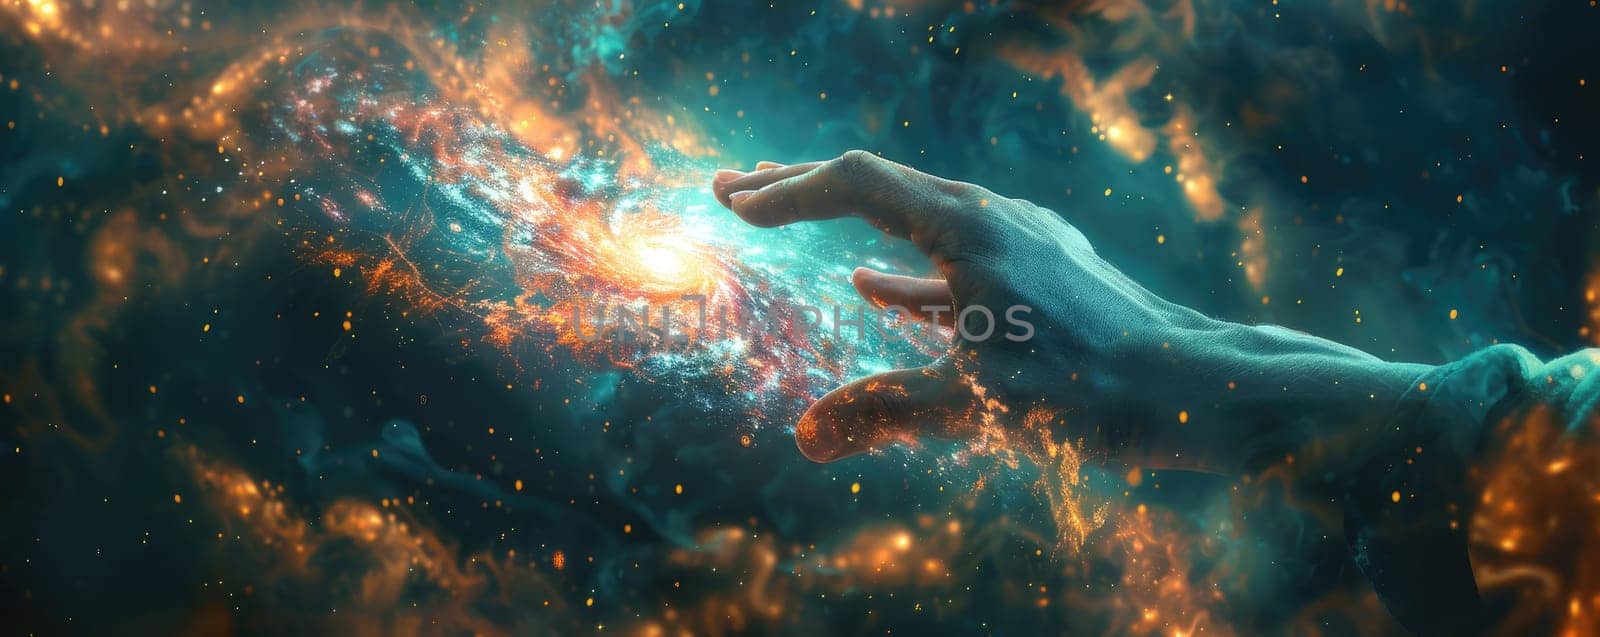 Conceptual design of a hand extending from a galaxy. Touch of human hands against the background of cosmic energy. by AI generated image.